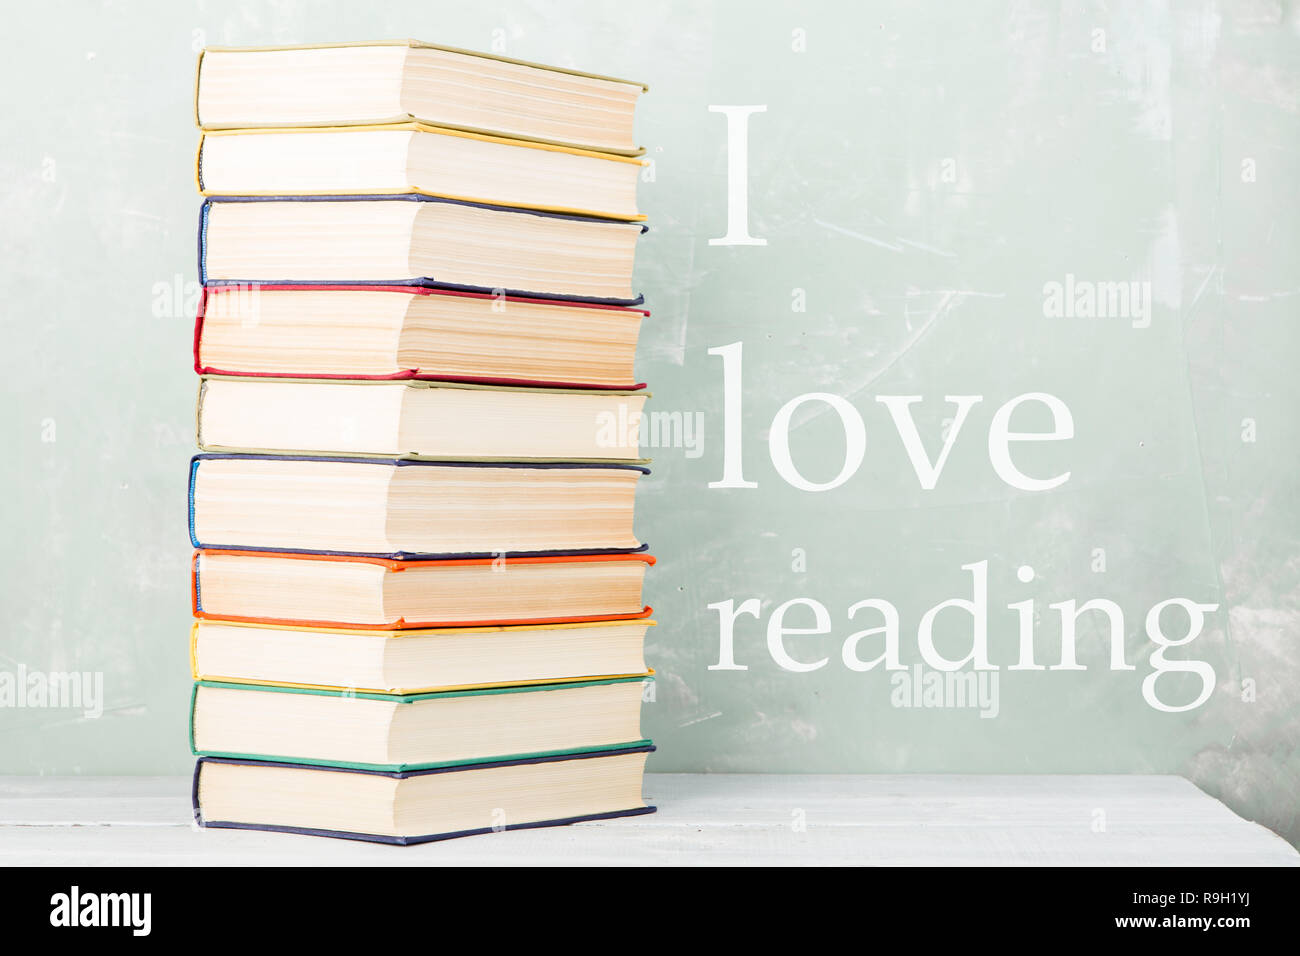 A stack of old colored books on shelf and green background with text 'I love reading' Stock Photo